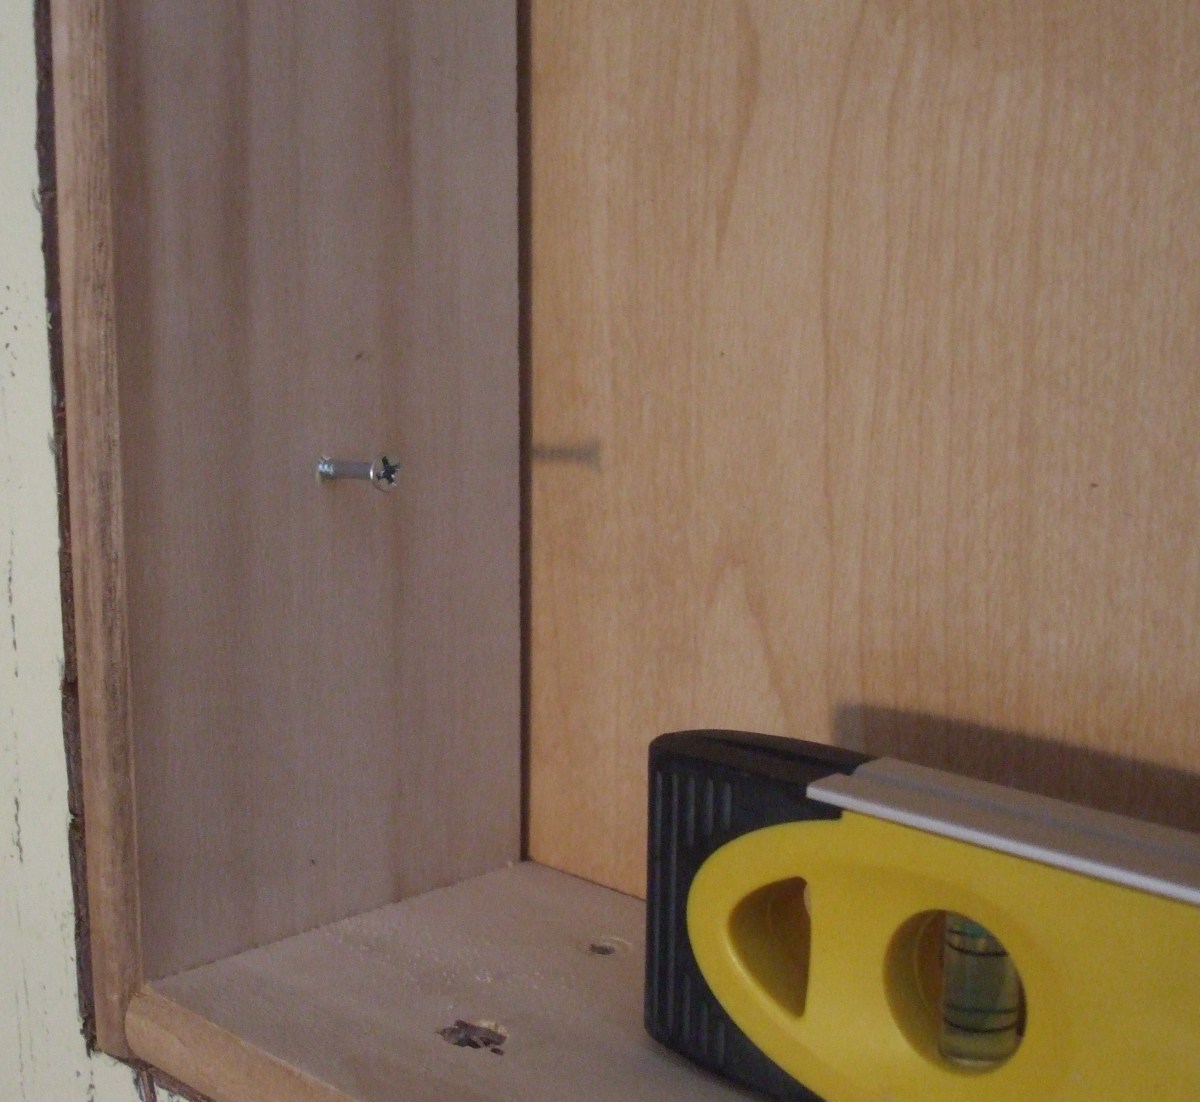 The screw was started in the side of the box, but no pilot hole was made in the stud until the level gave its approval. 